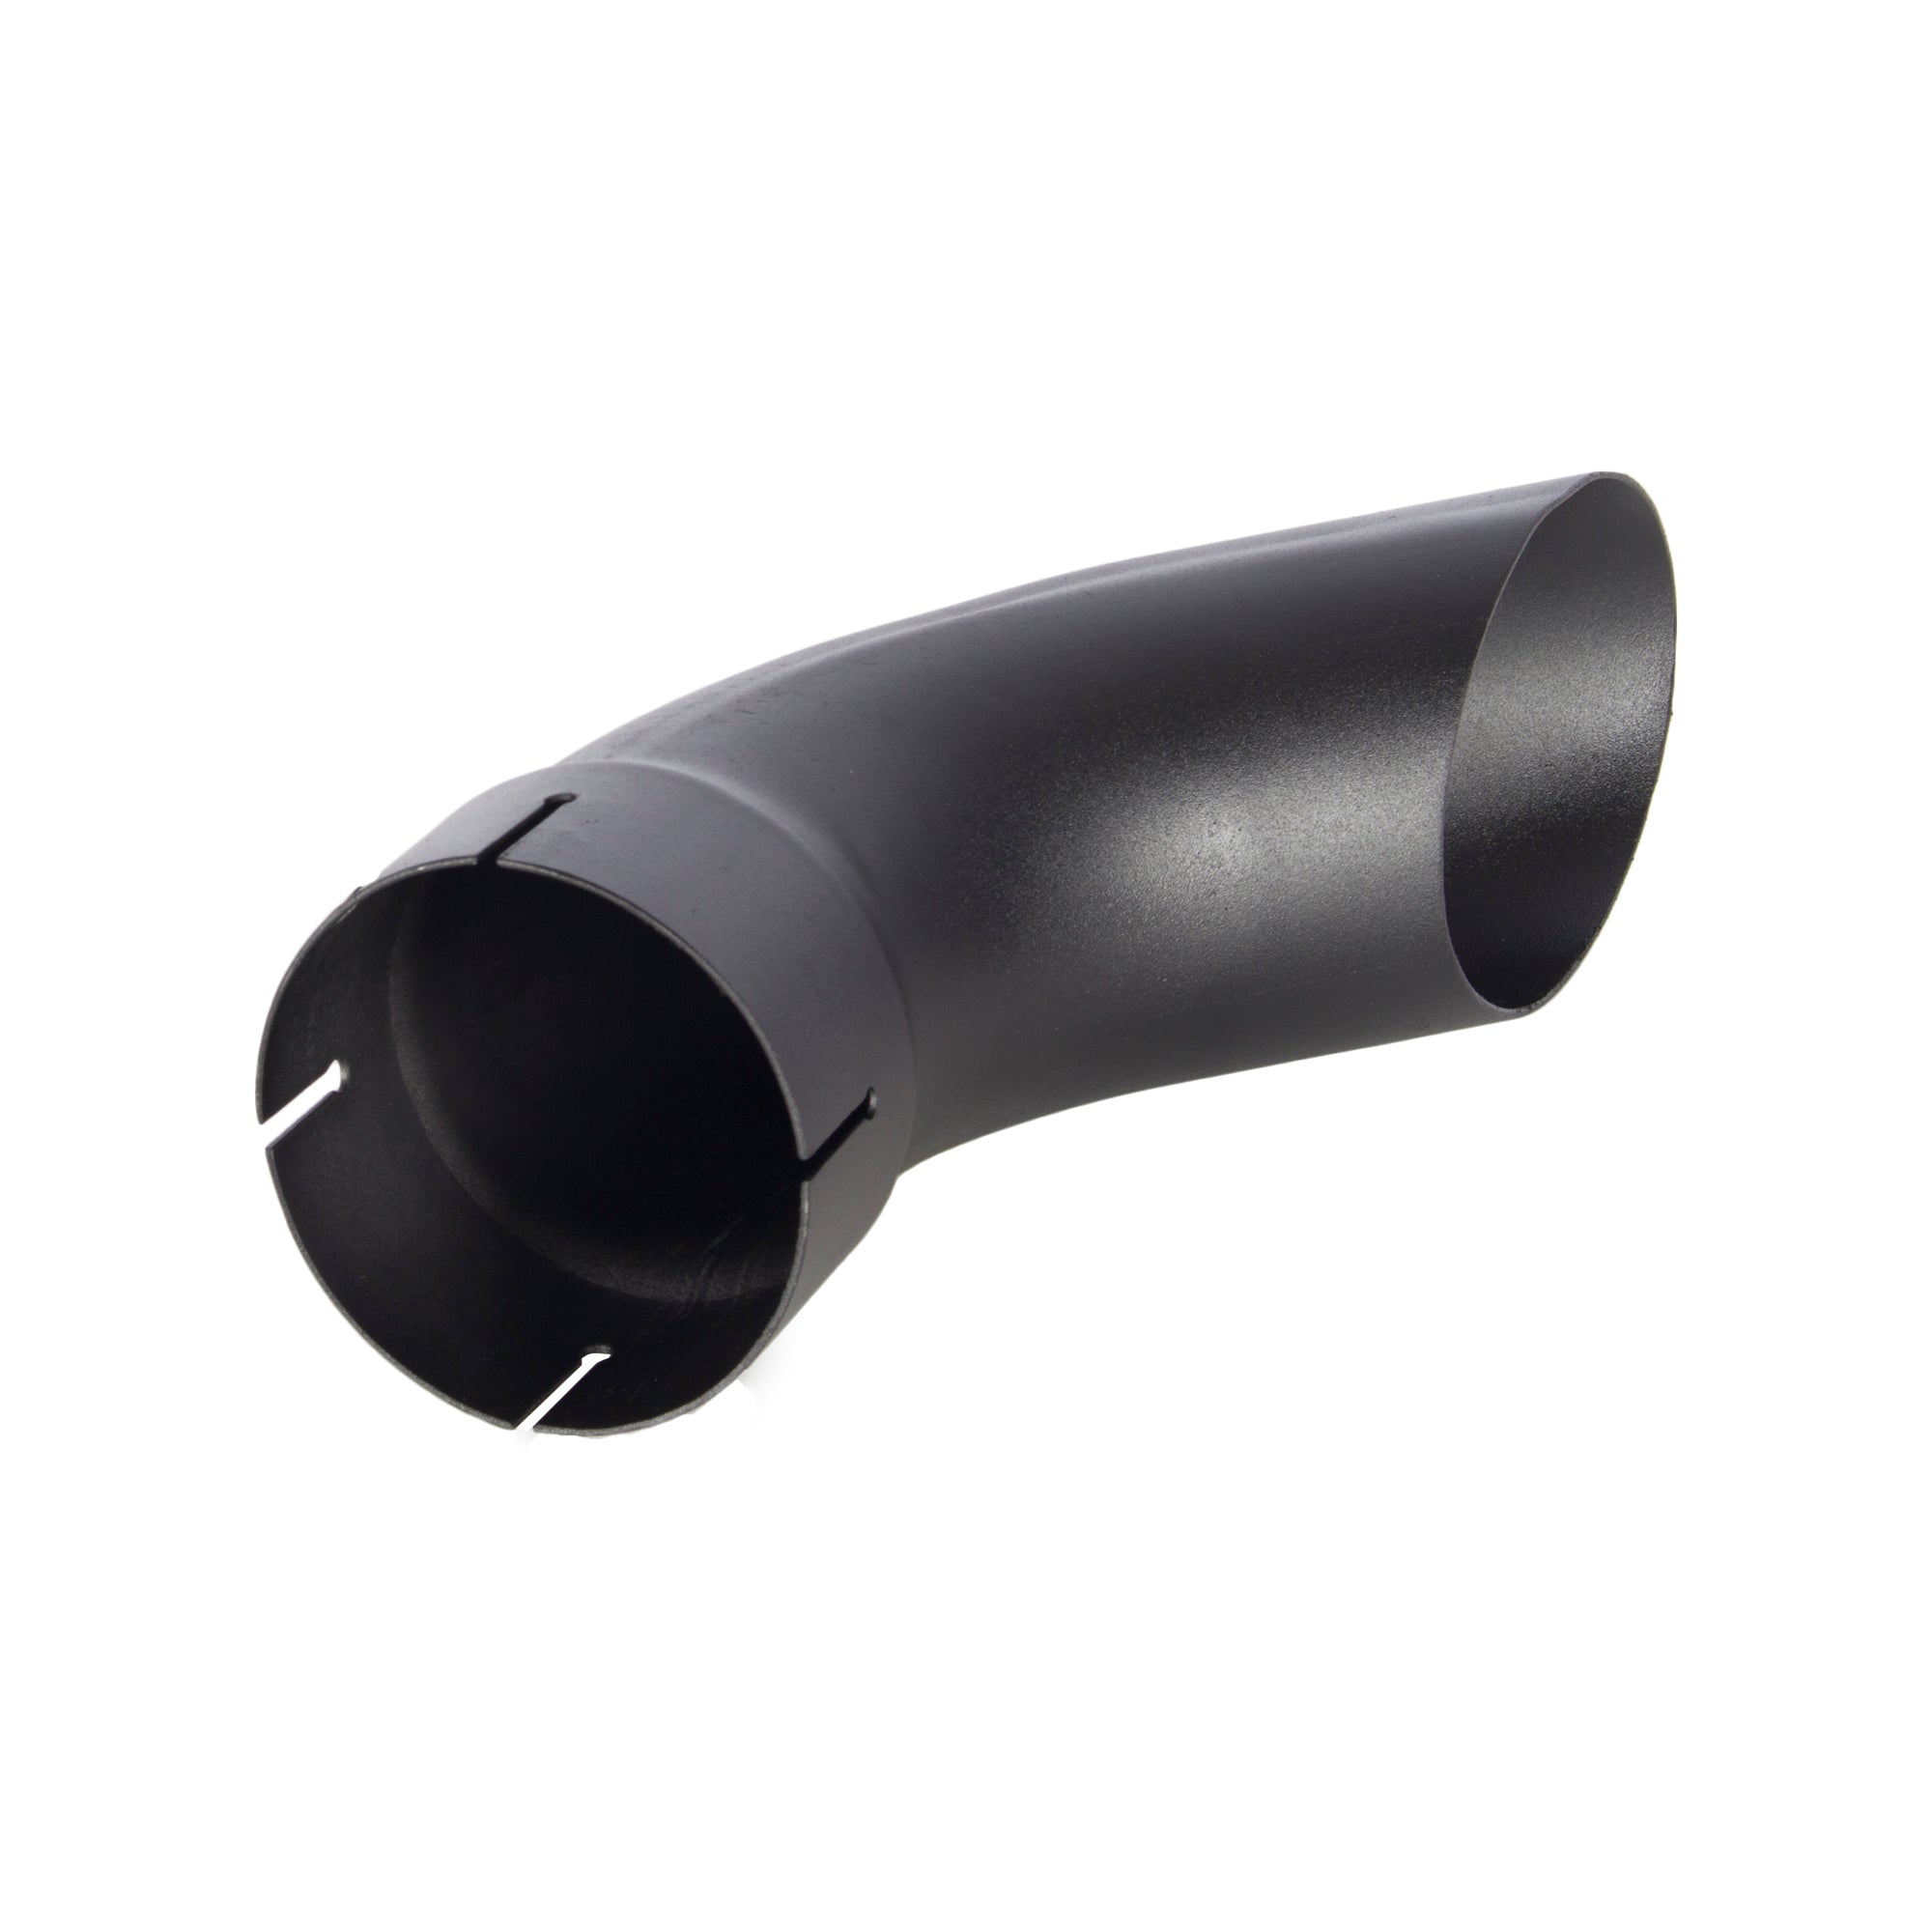 Exhaust Stack Pipe Replacement for UNIVERSAL  - 4" x 12", Curved Black